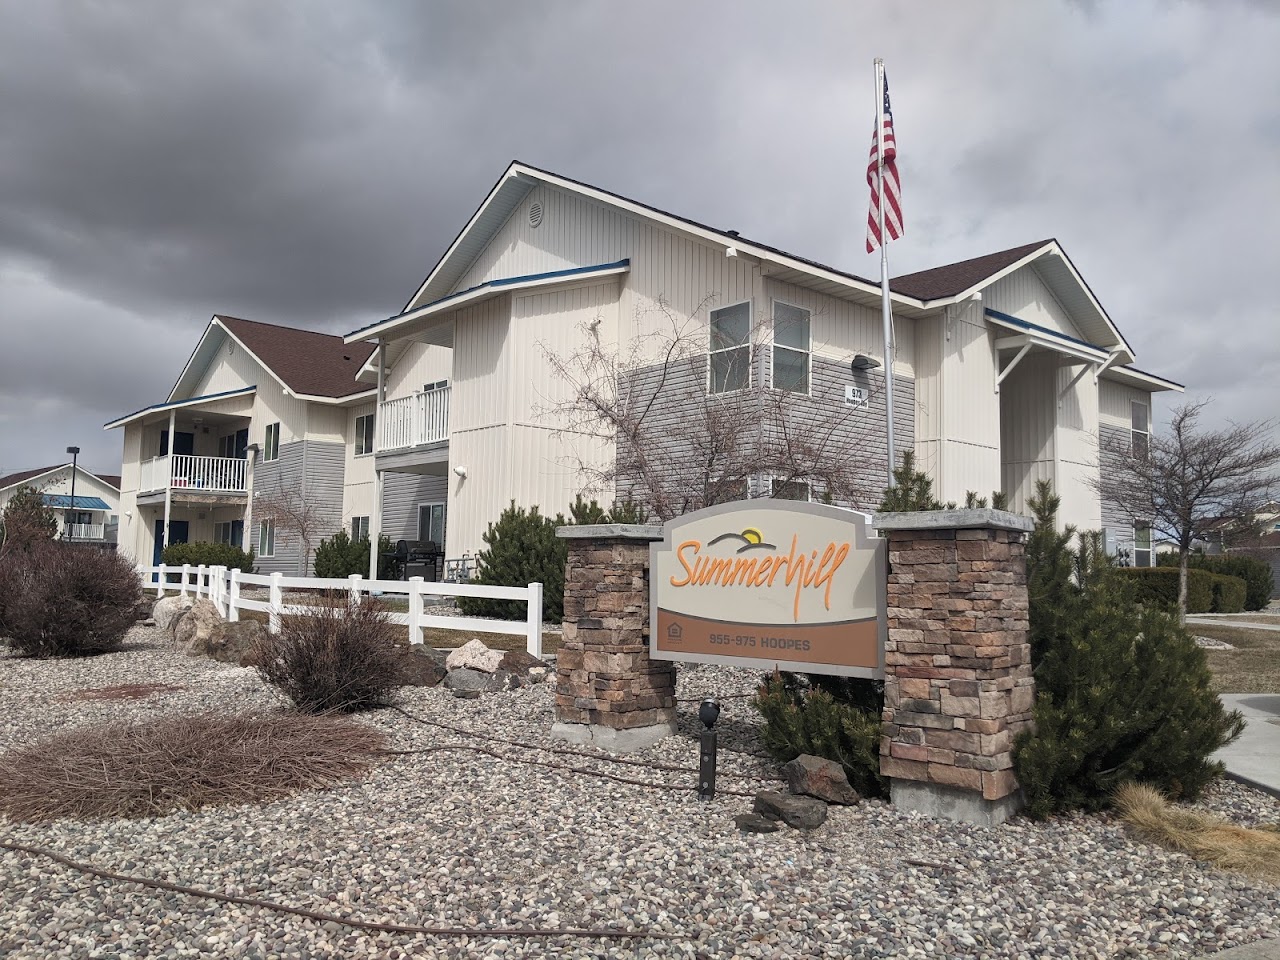 Photo of SUMMERHILL. Affordable housing located at 965 HOOPES AVENUE IDAHO FALLS, ID 83404